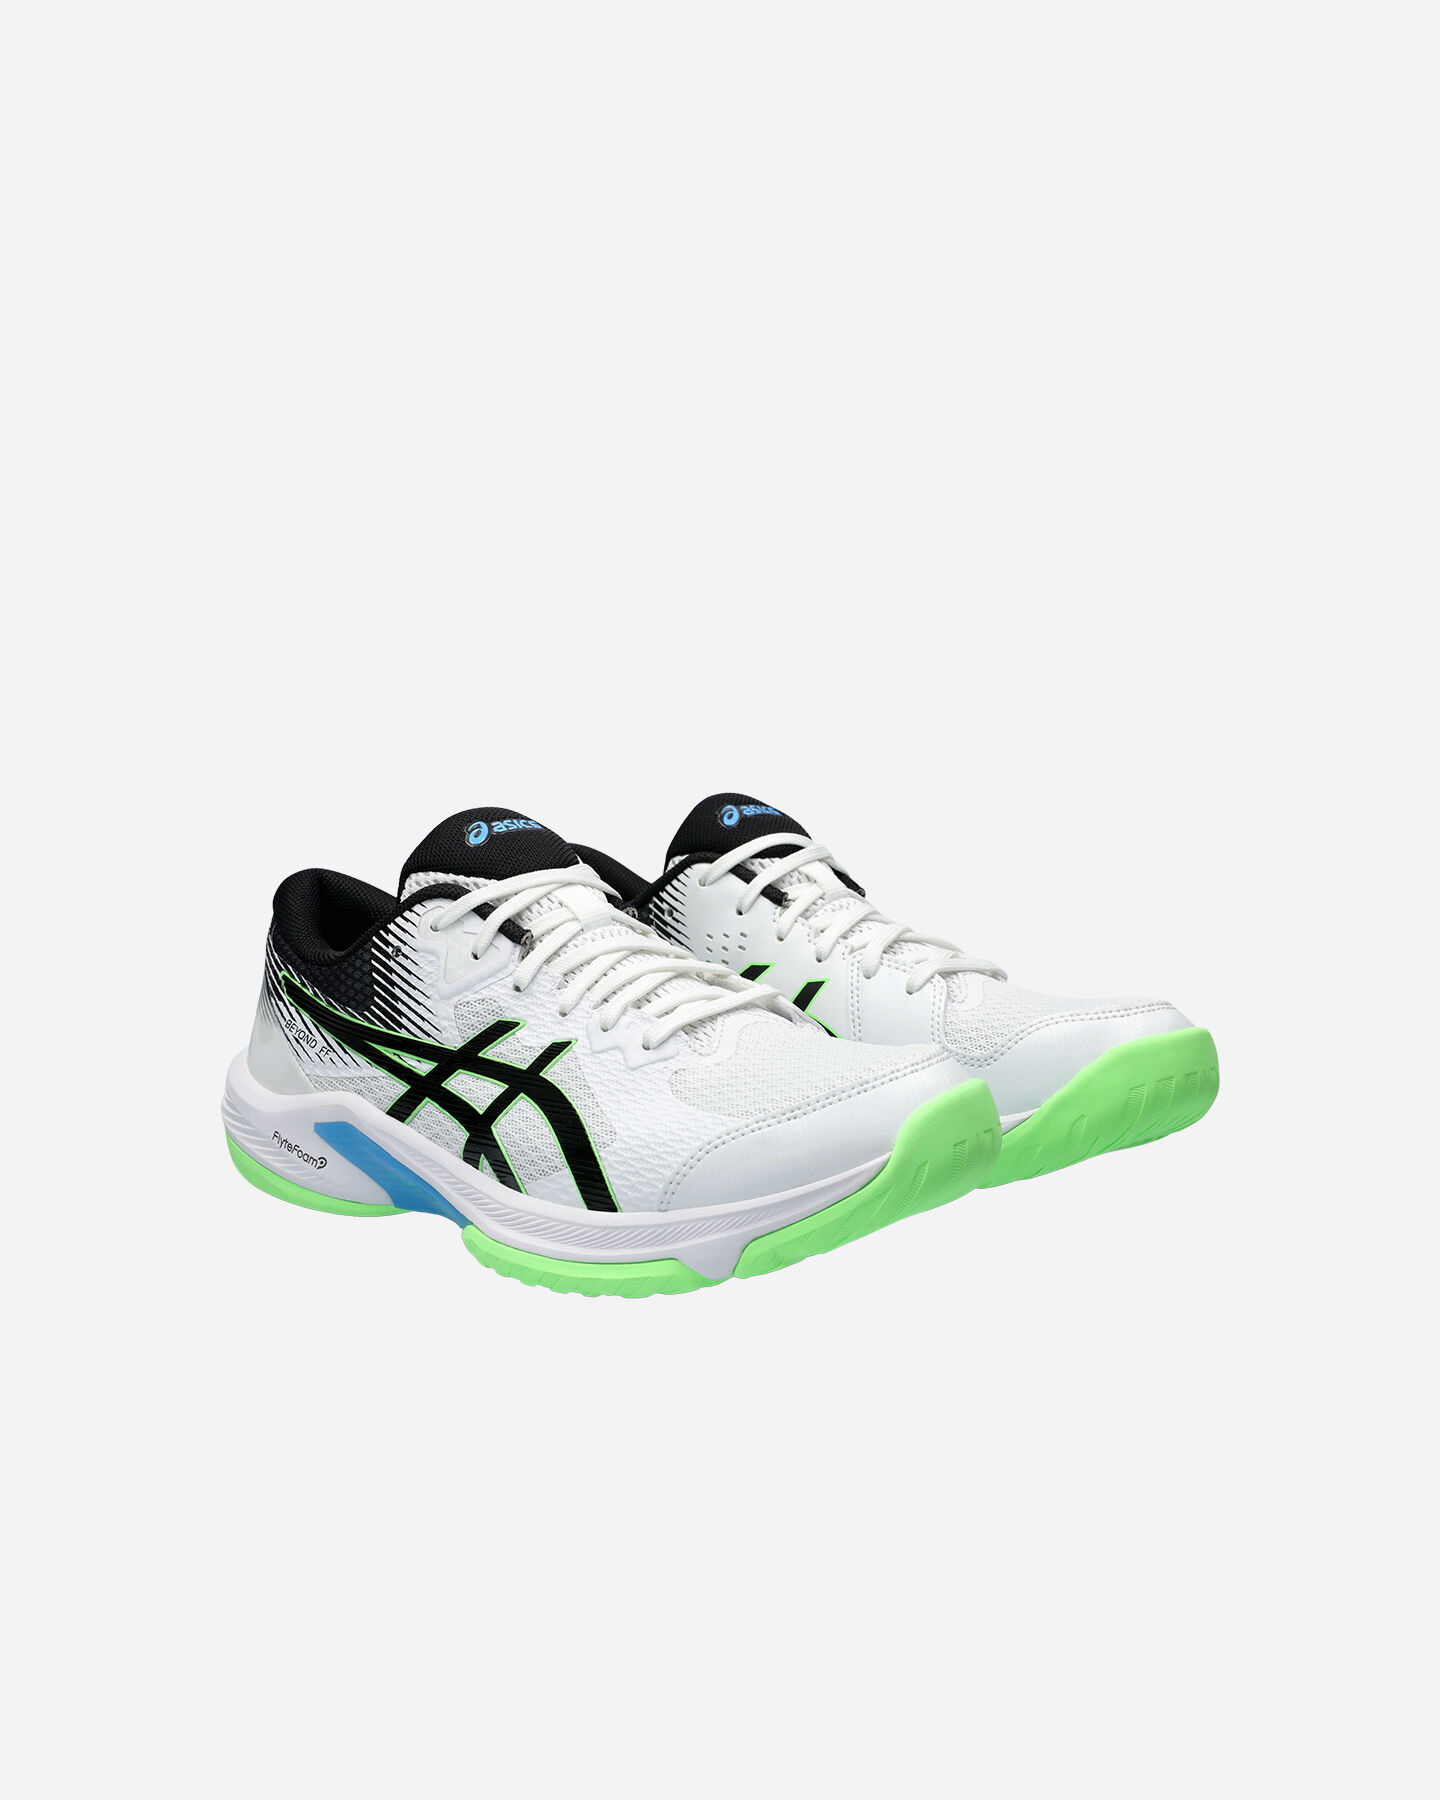  Scarpe volley ASICS BEYOND FF M S5643085|101|7H scatto 1